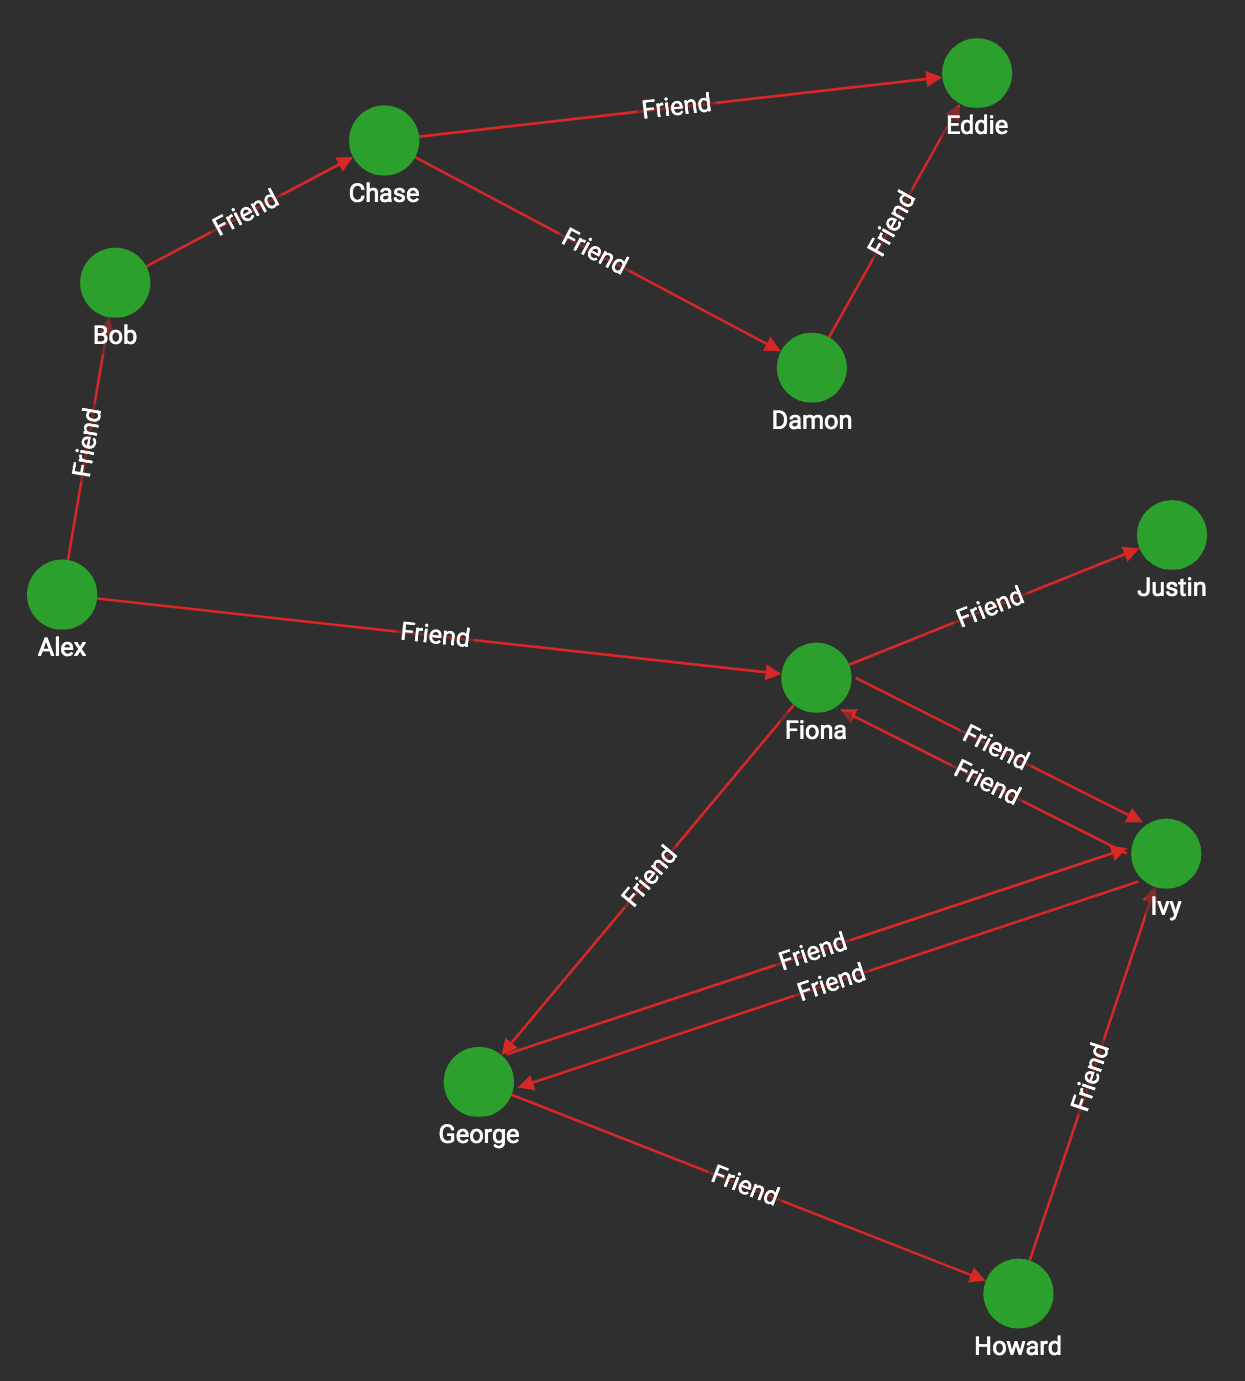 Graph with directed friendship edges